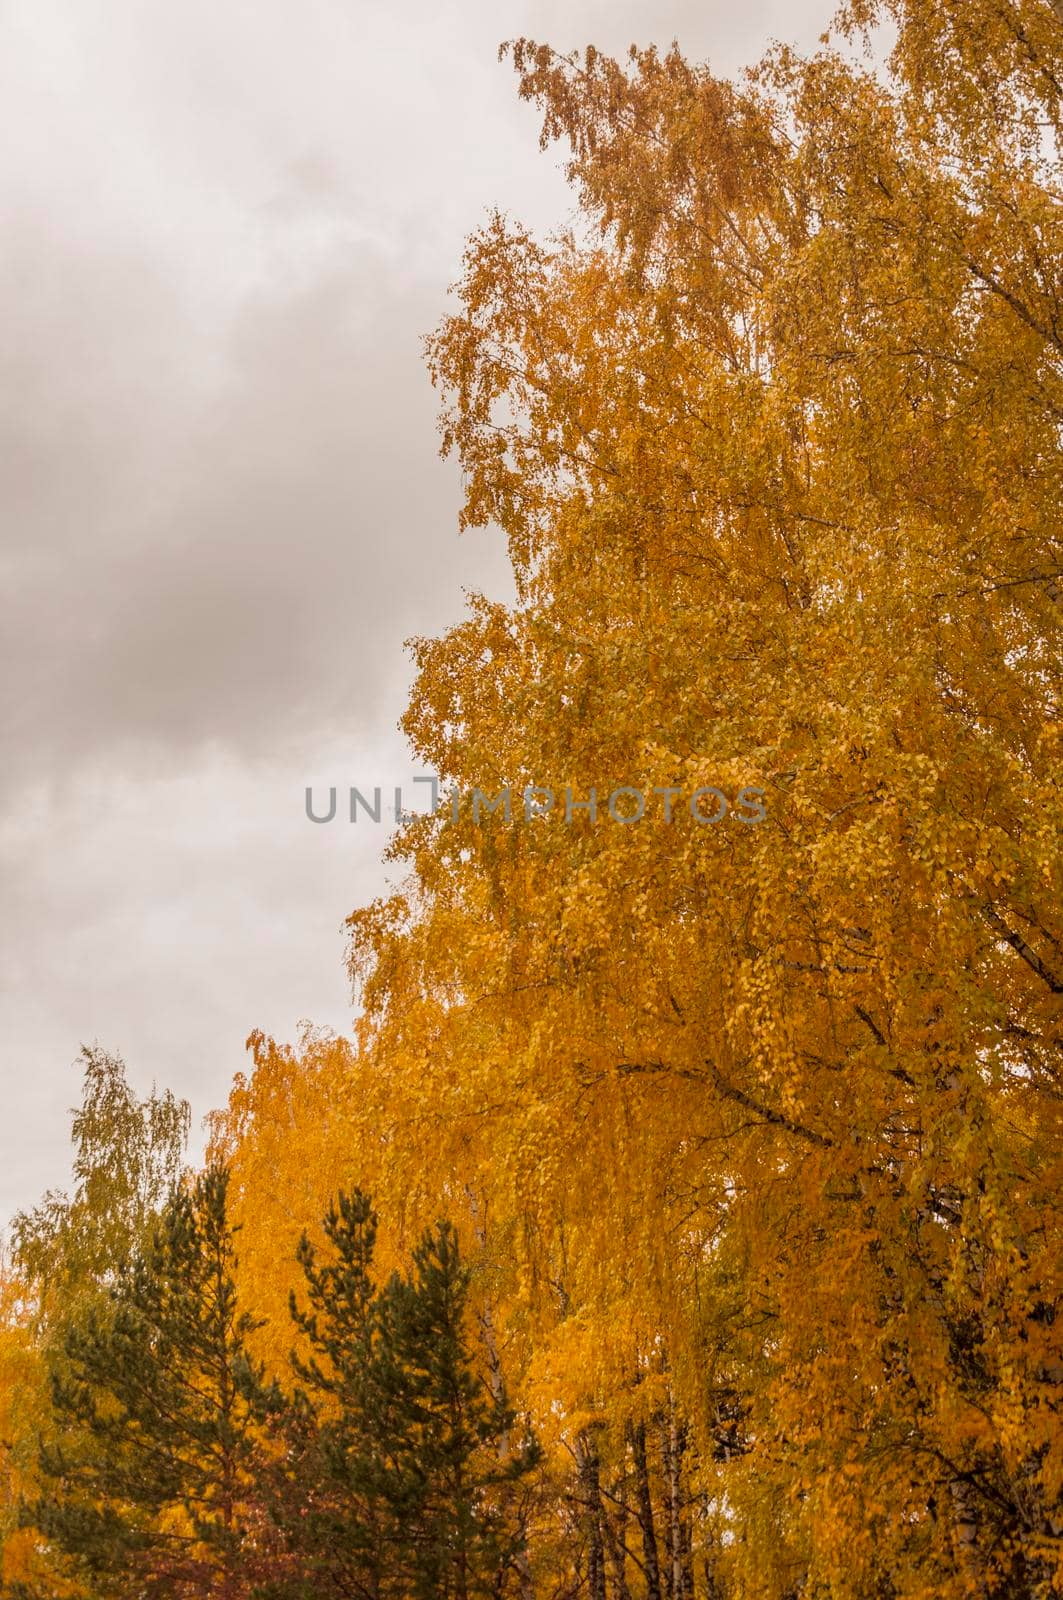 Autumn scenery. Beautiful scene with birches in yellow autumn birch forest in october among other birches in birch grove by inxti